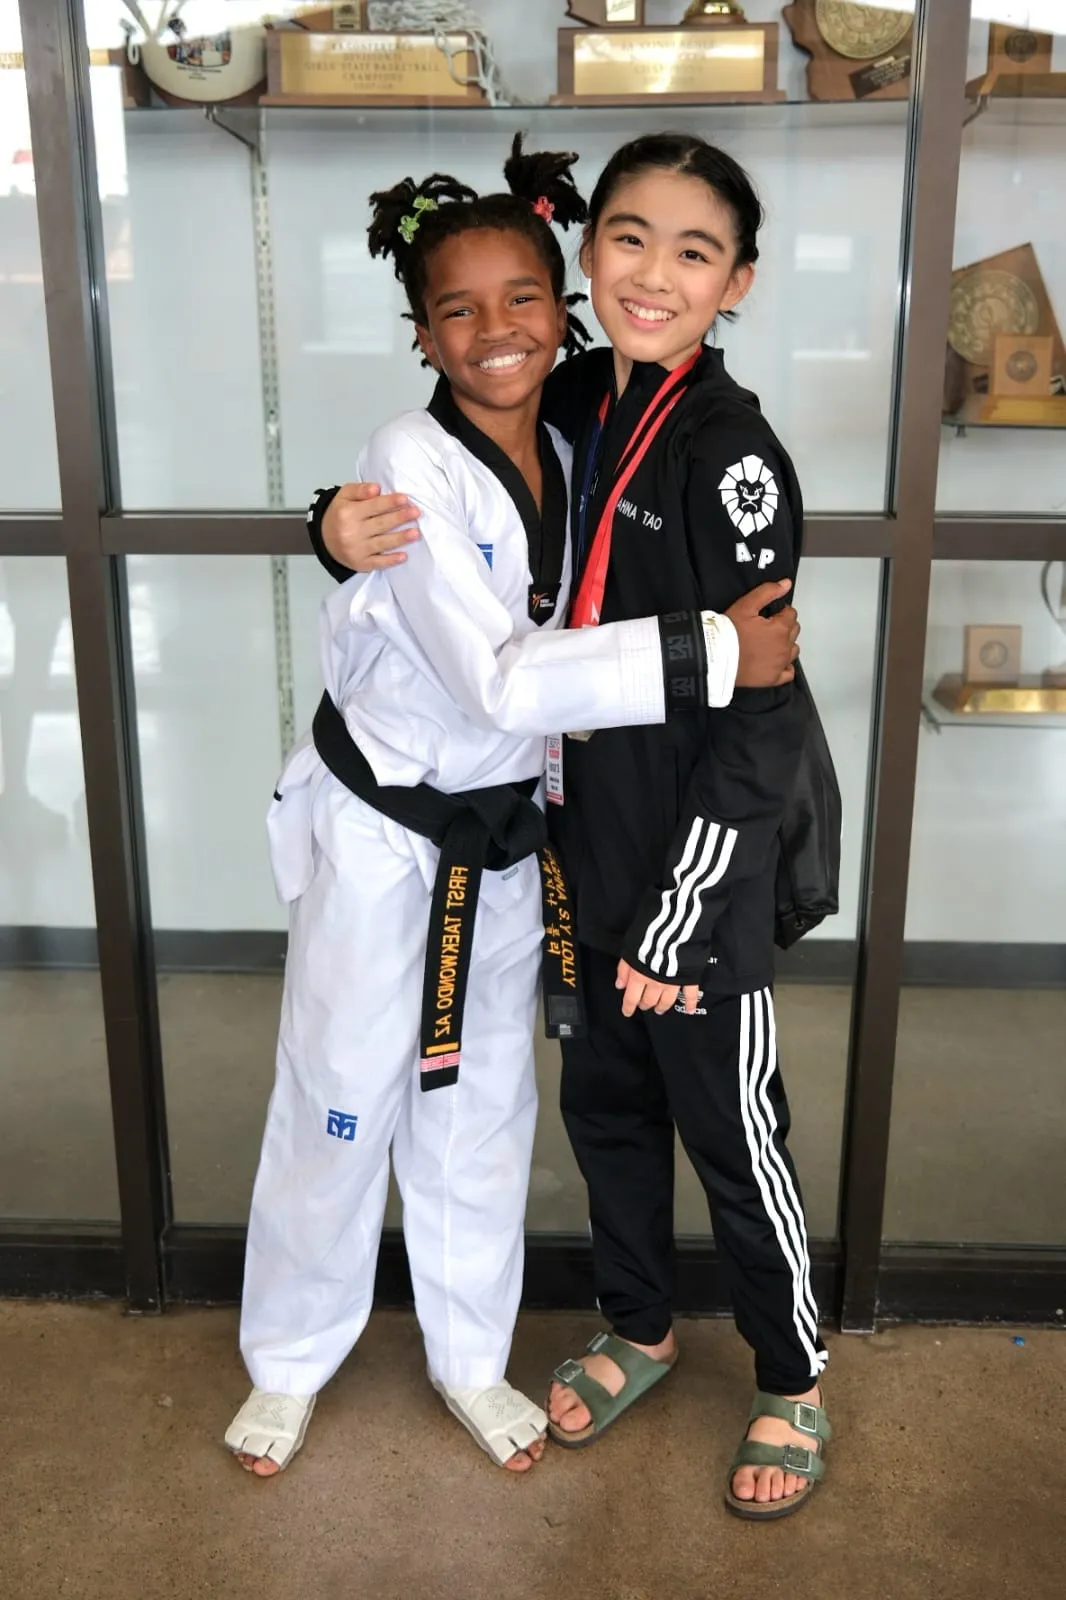 two-young-girls-in-martial-arts-attire-embracing-smiling